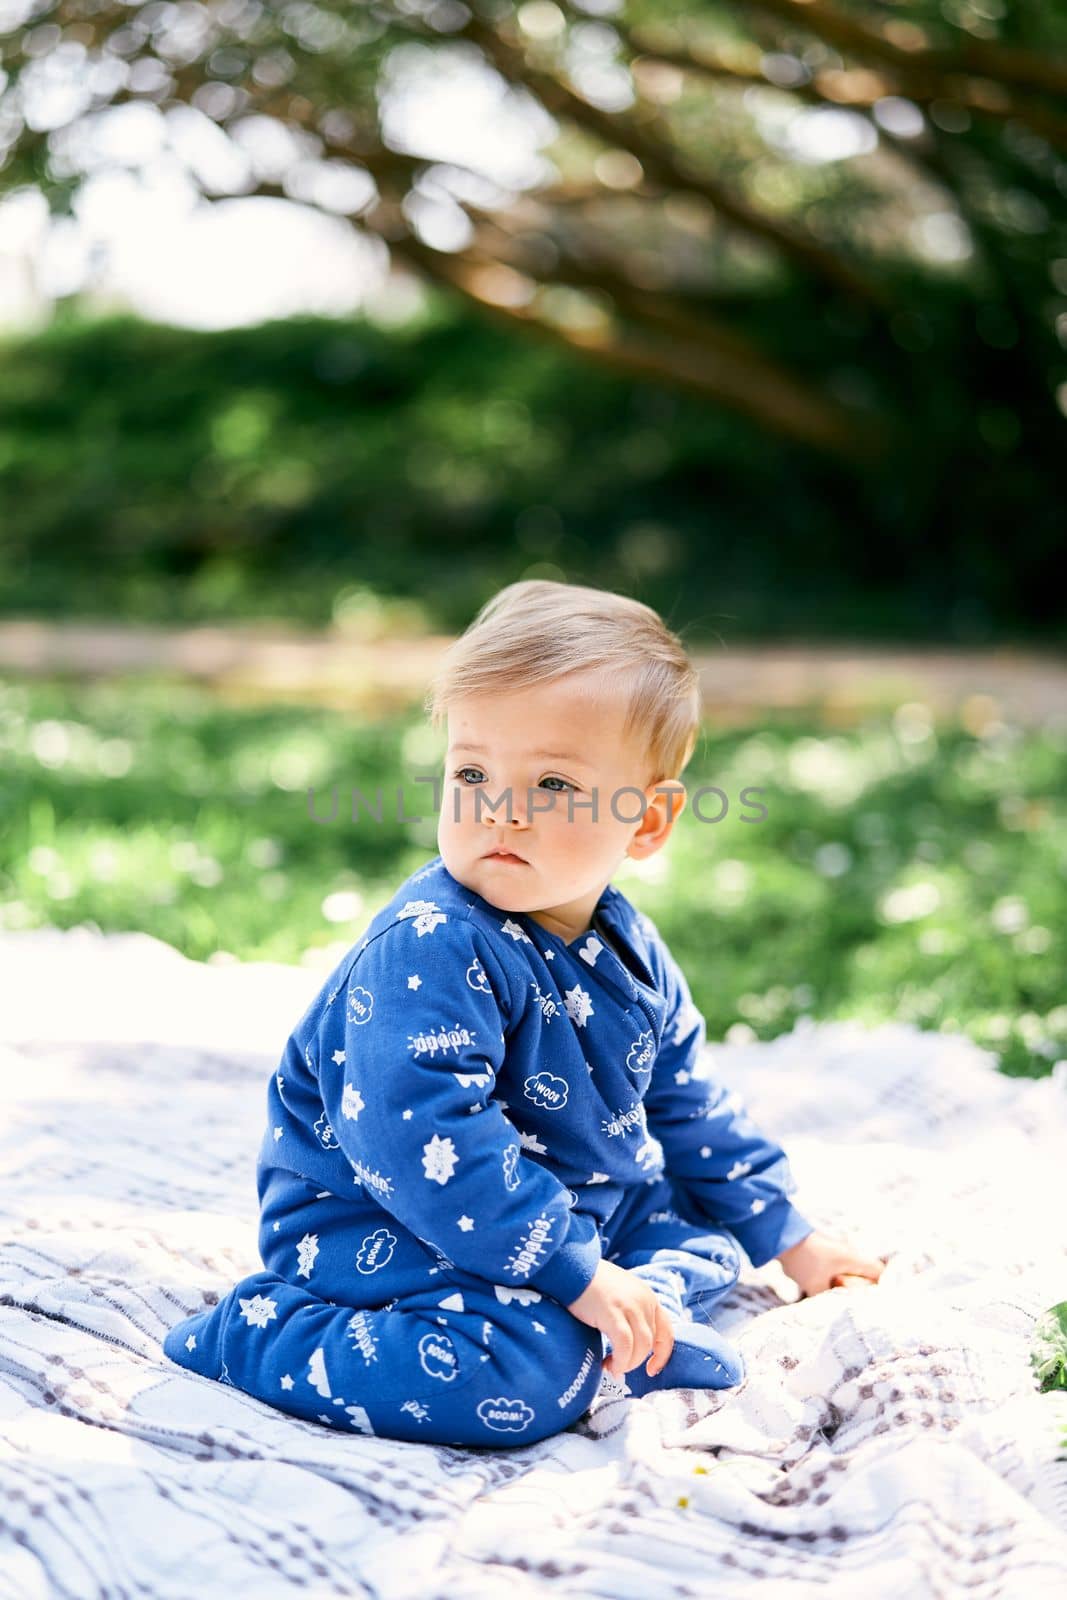 Small child in a blue overalls sits on his knees with his head turned on a checkered blanket on a green lawn by Nadtochiy